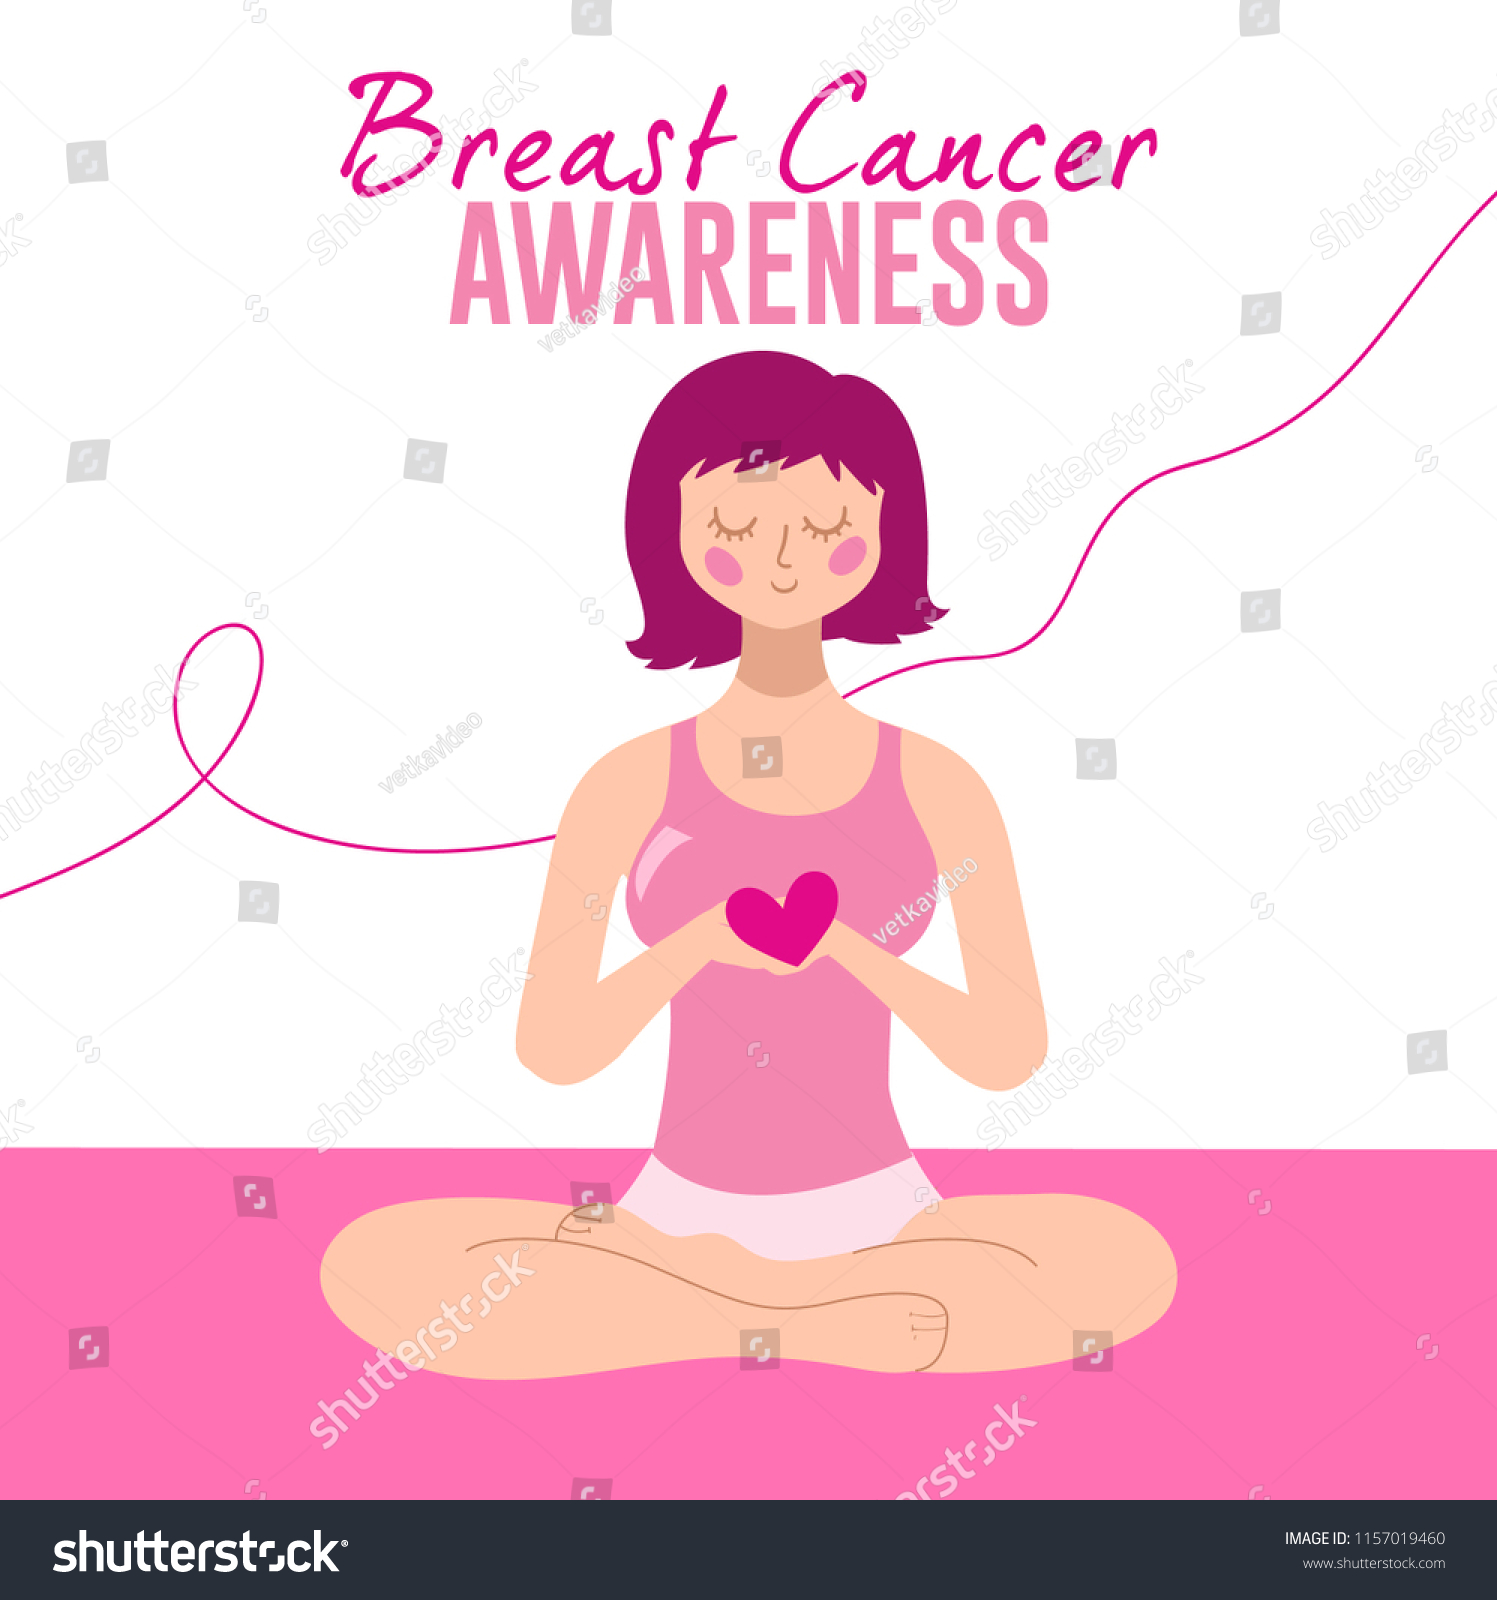 Breast Cancer Awareness, Woman sitting in yoga pose and holding heart in her hand. Pink Ribbon Background. Vector illustration #1157019460